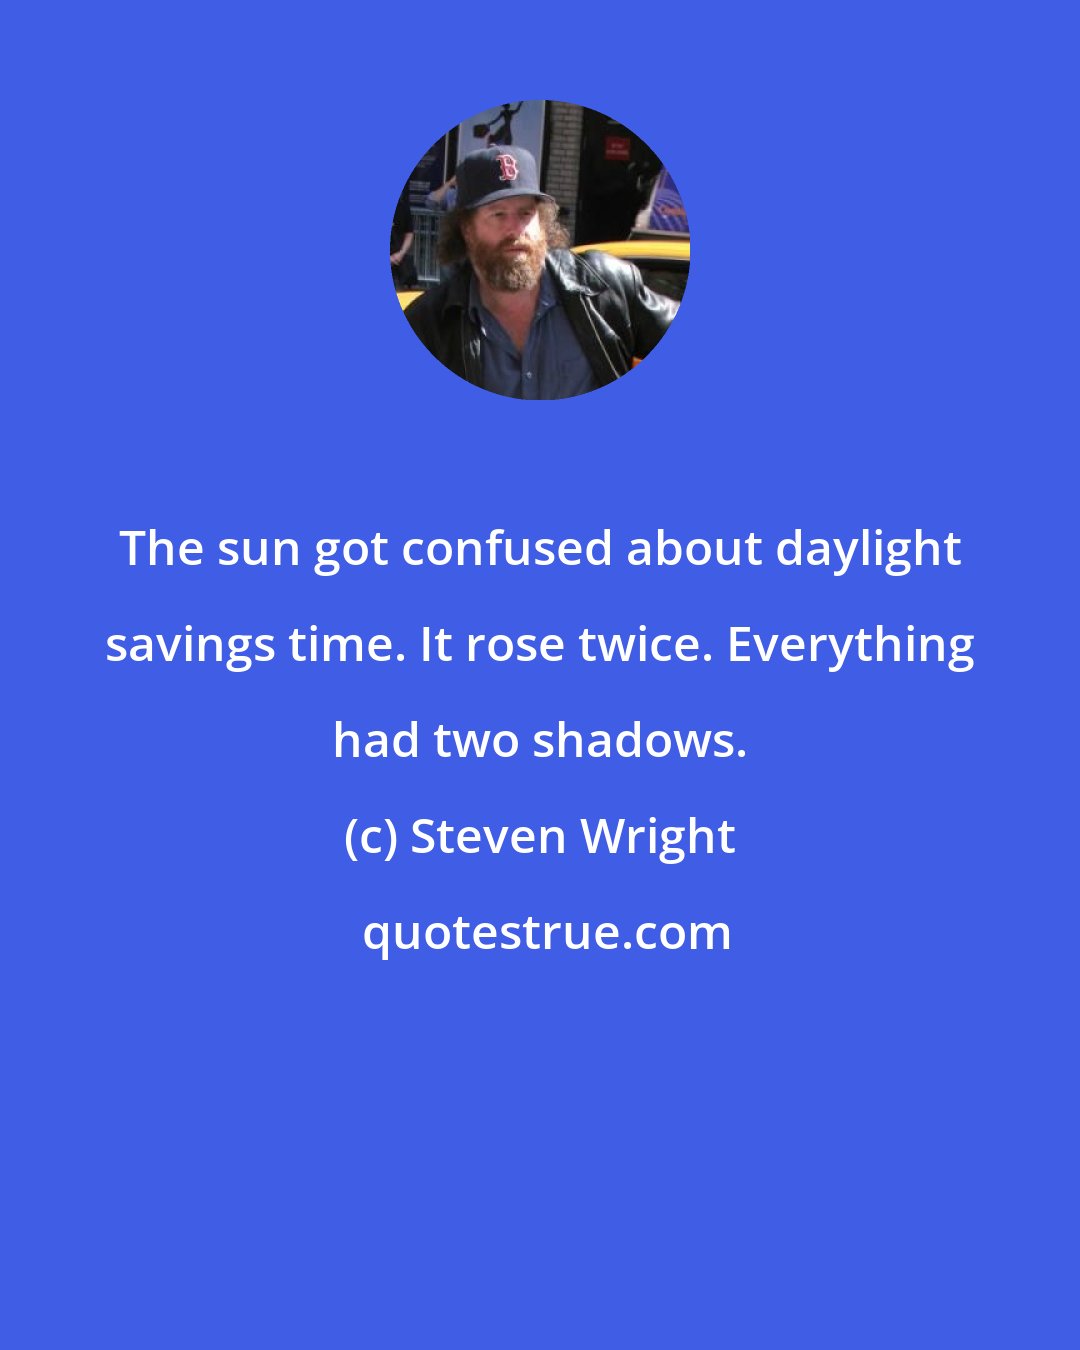 Steven Wright: The sun got confused about daylight savings time. It rose twice. Everything had two shadows.